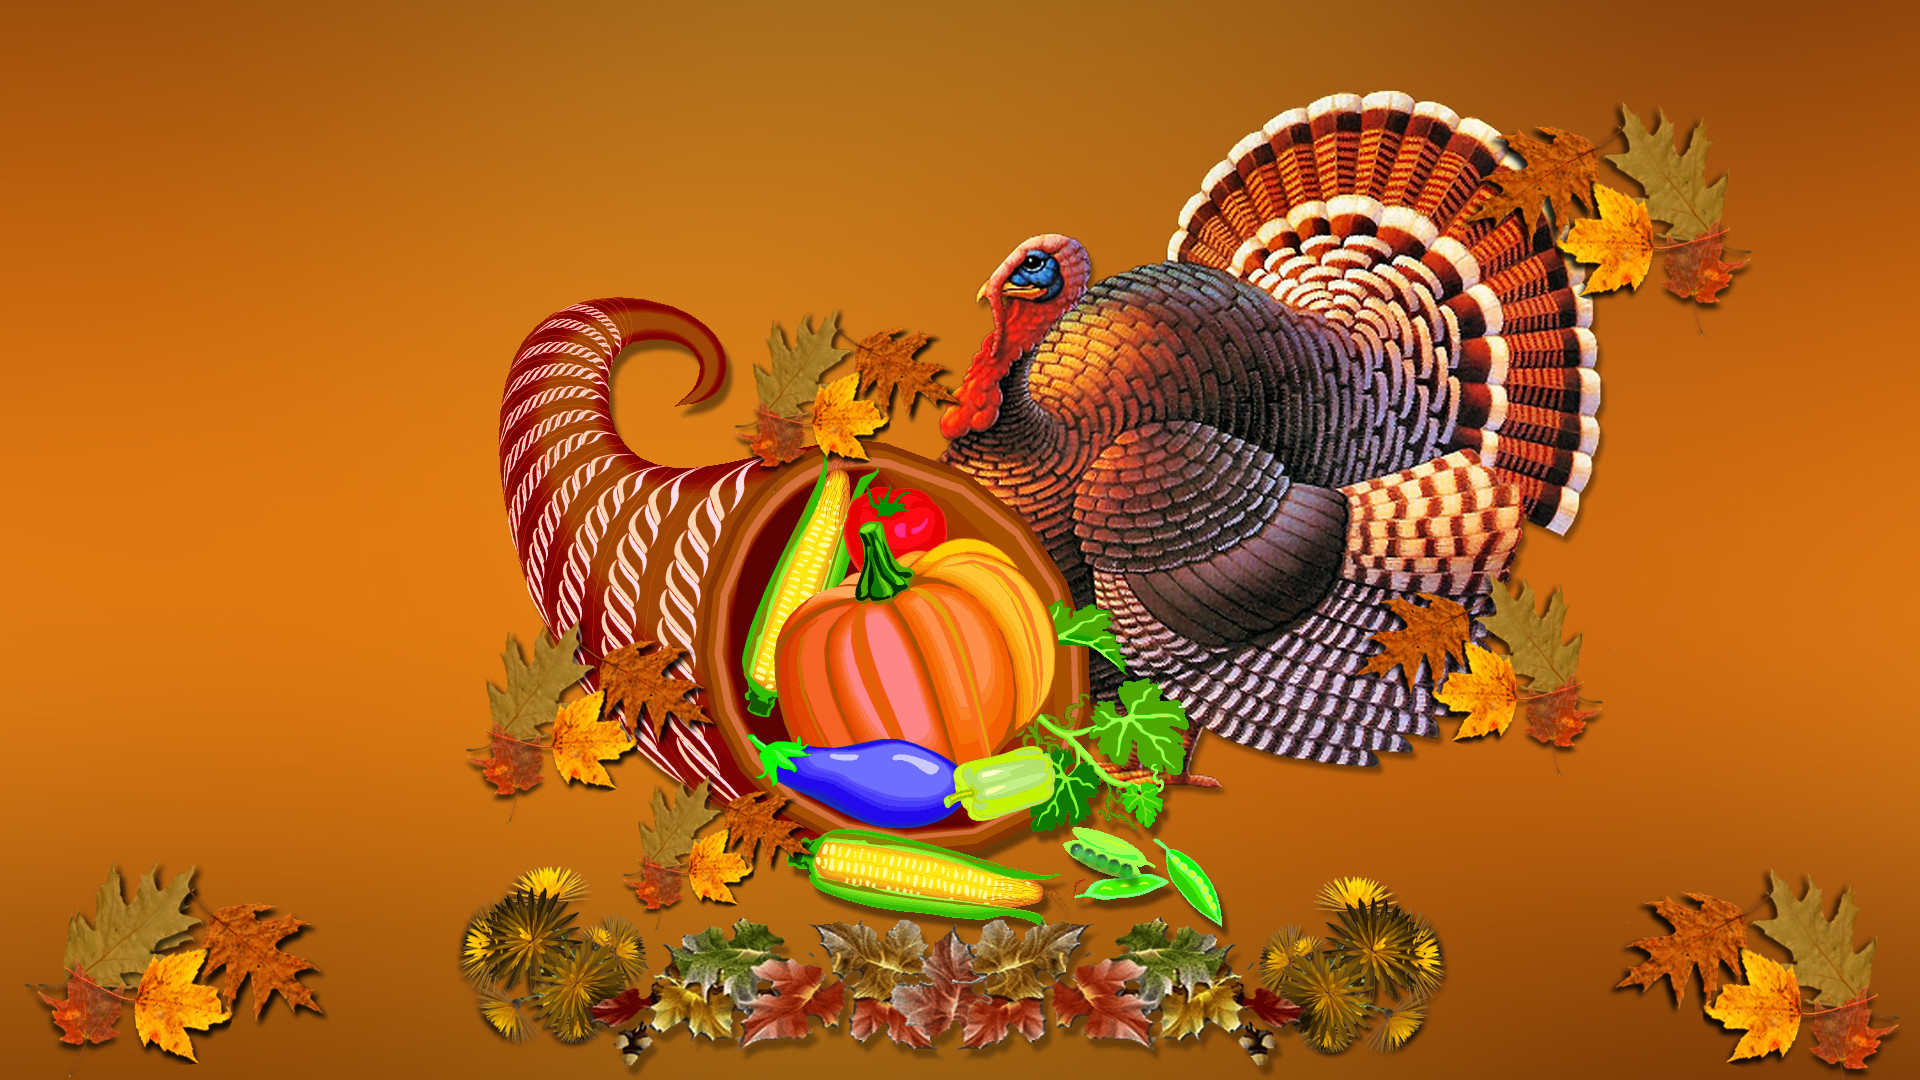 1920x1080, Thanksgiving Wallpapers 
 Data Id 213973 - Happy Thanksgiving Cover Photos For Facebook - HD Wallpaper 